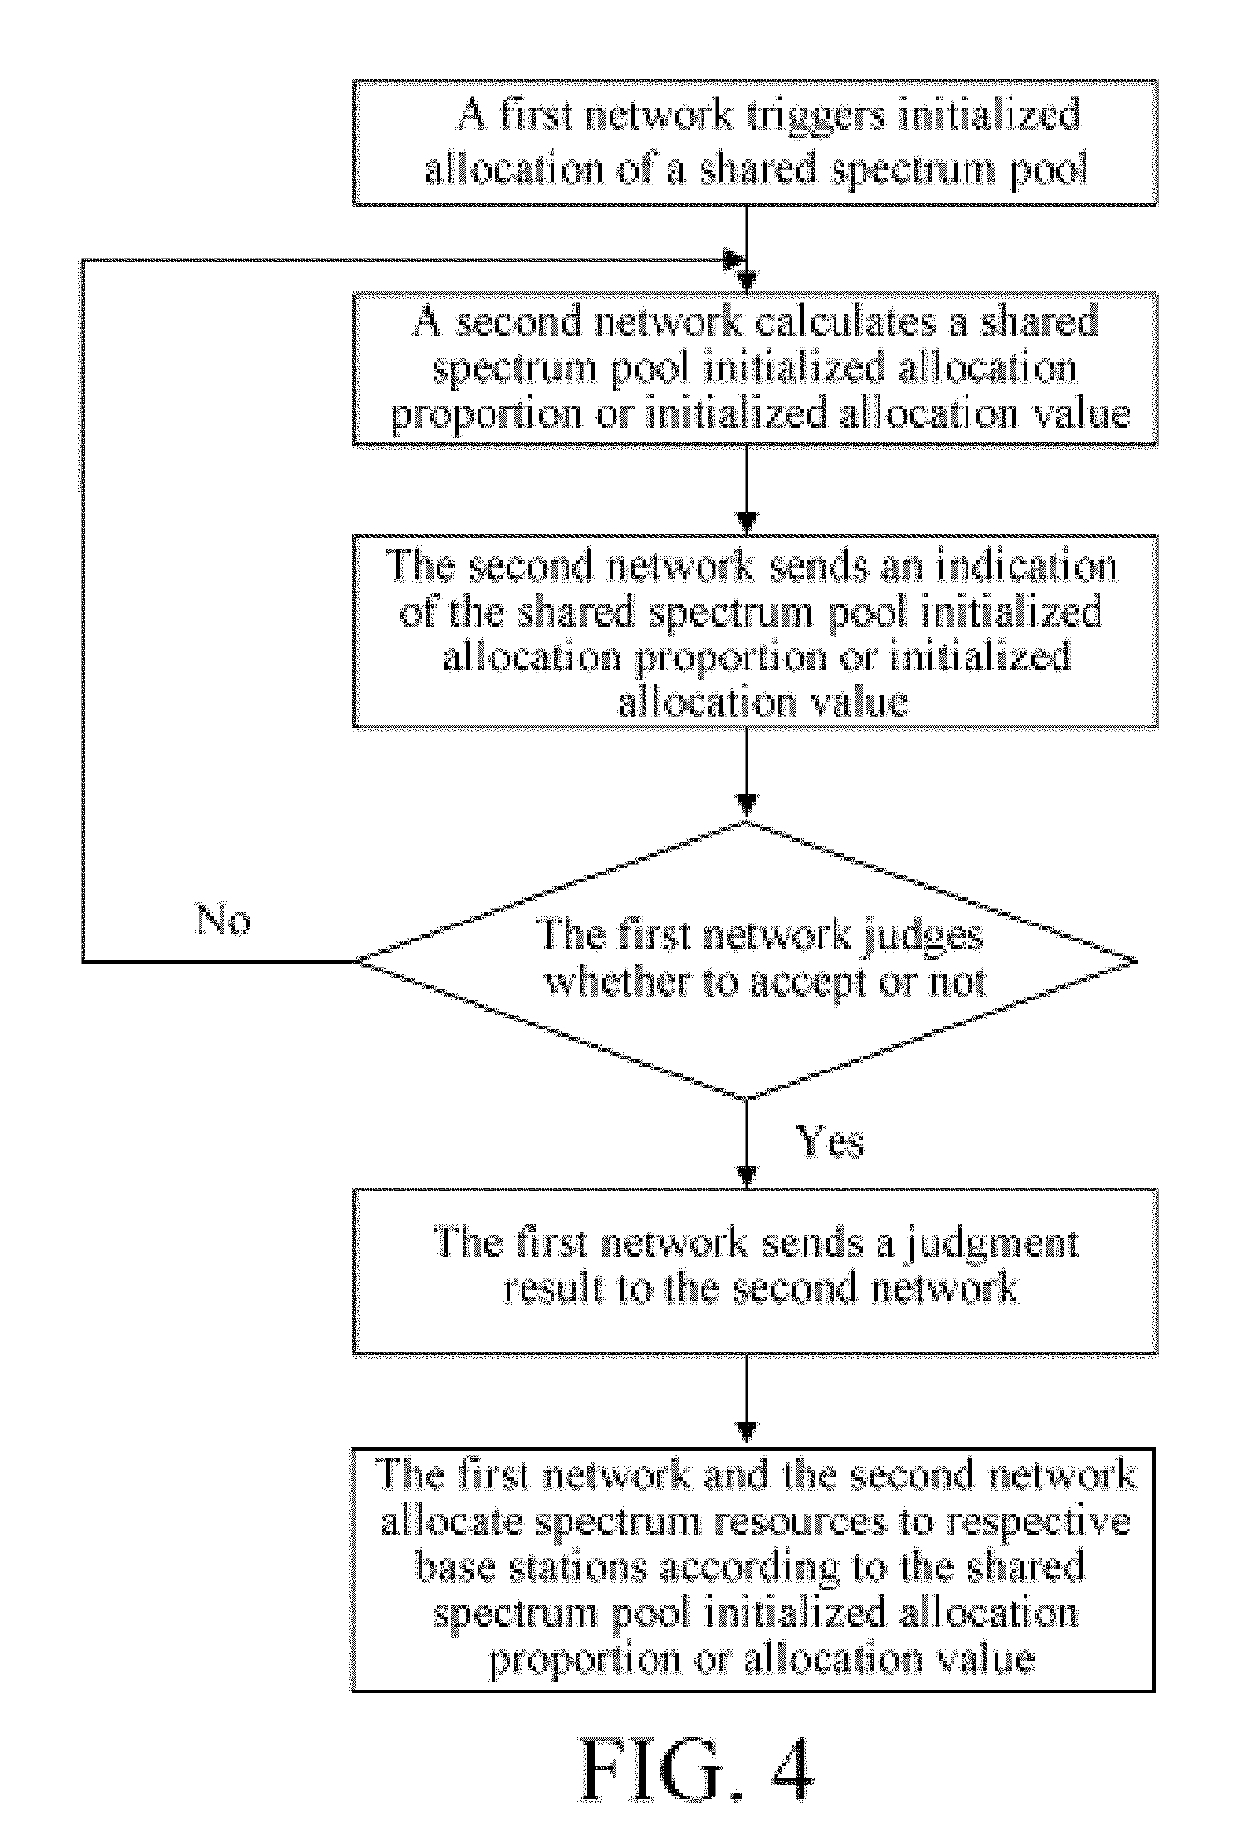 Inter-network shared frequency spectrum optimization system and method